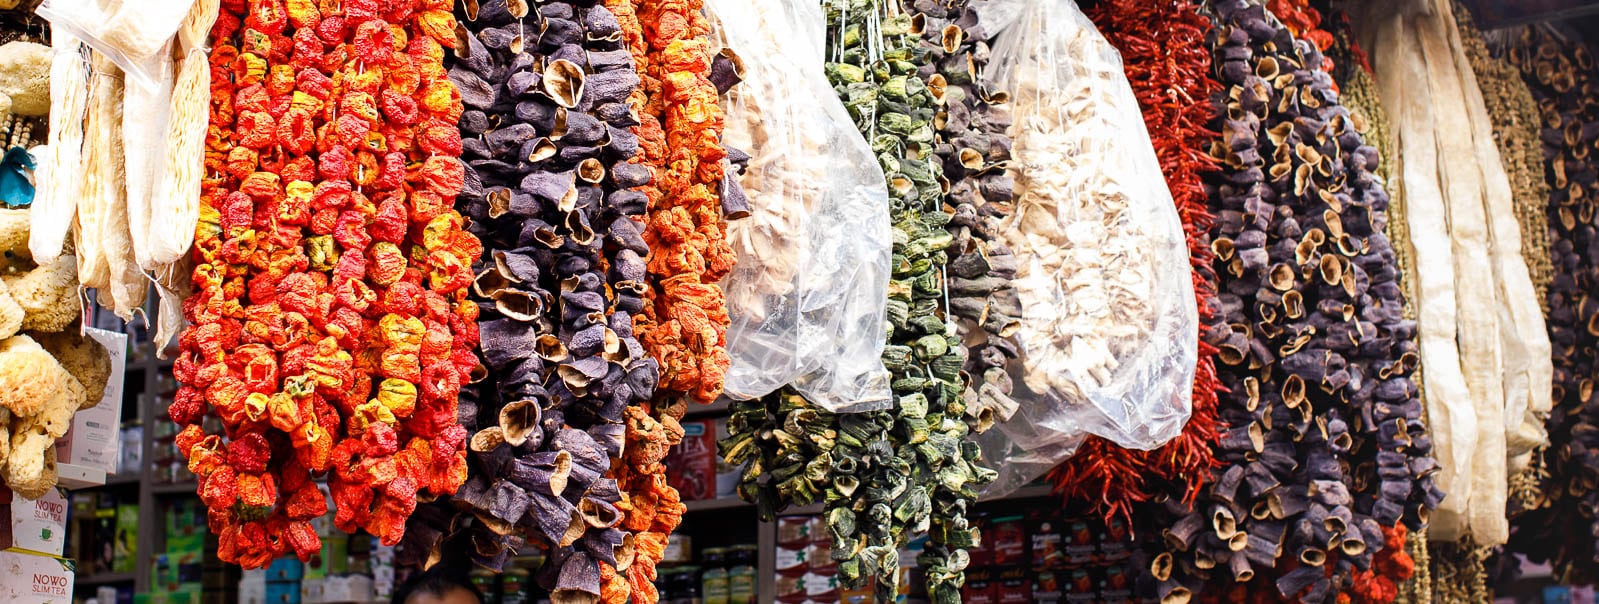 Dried vegetables hanging for sale at spice market